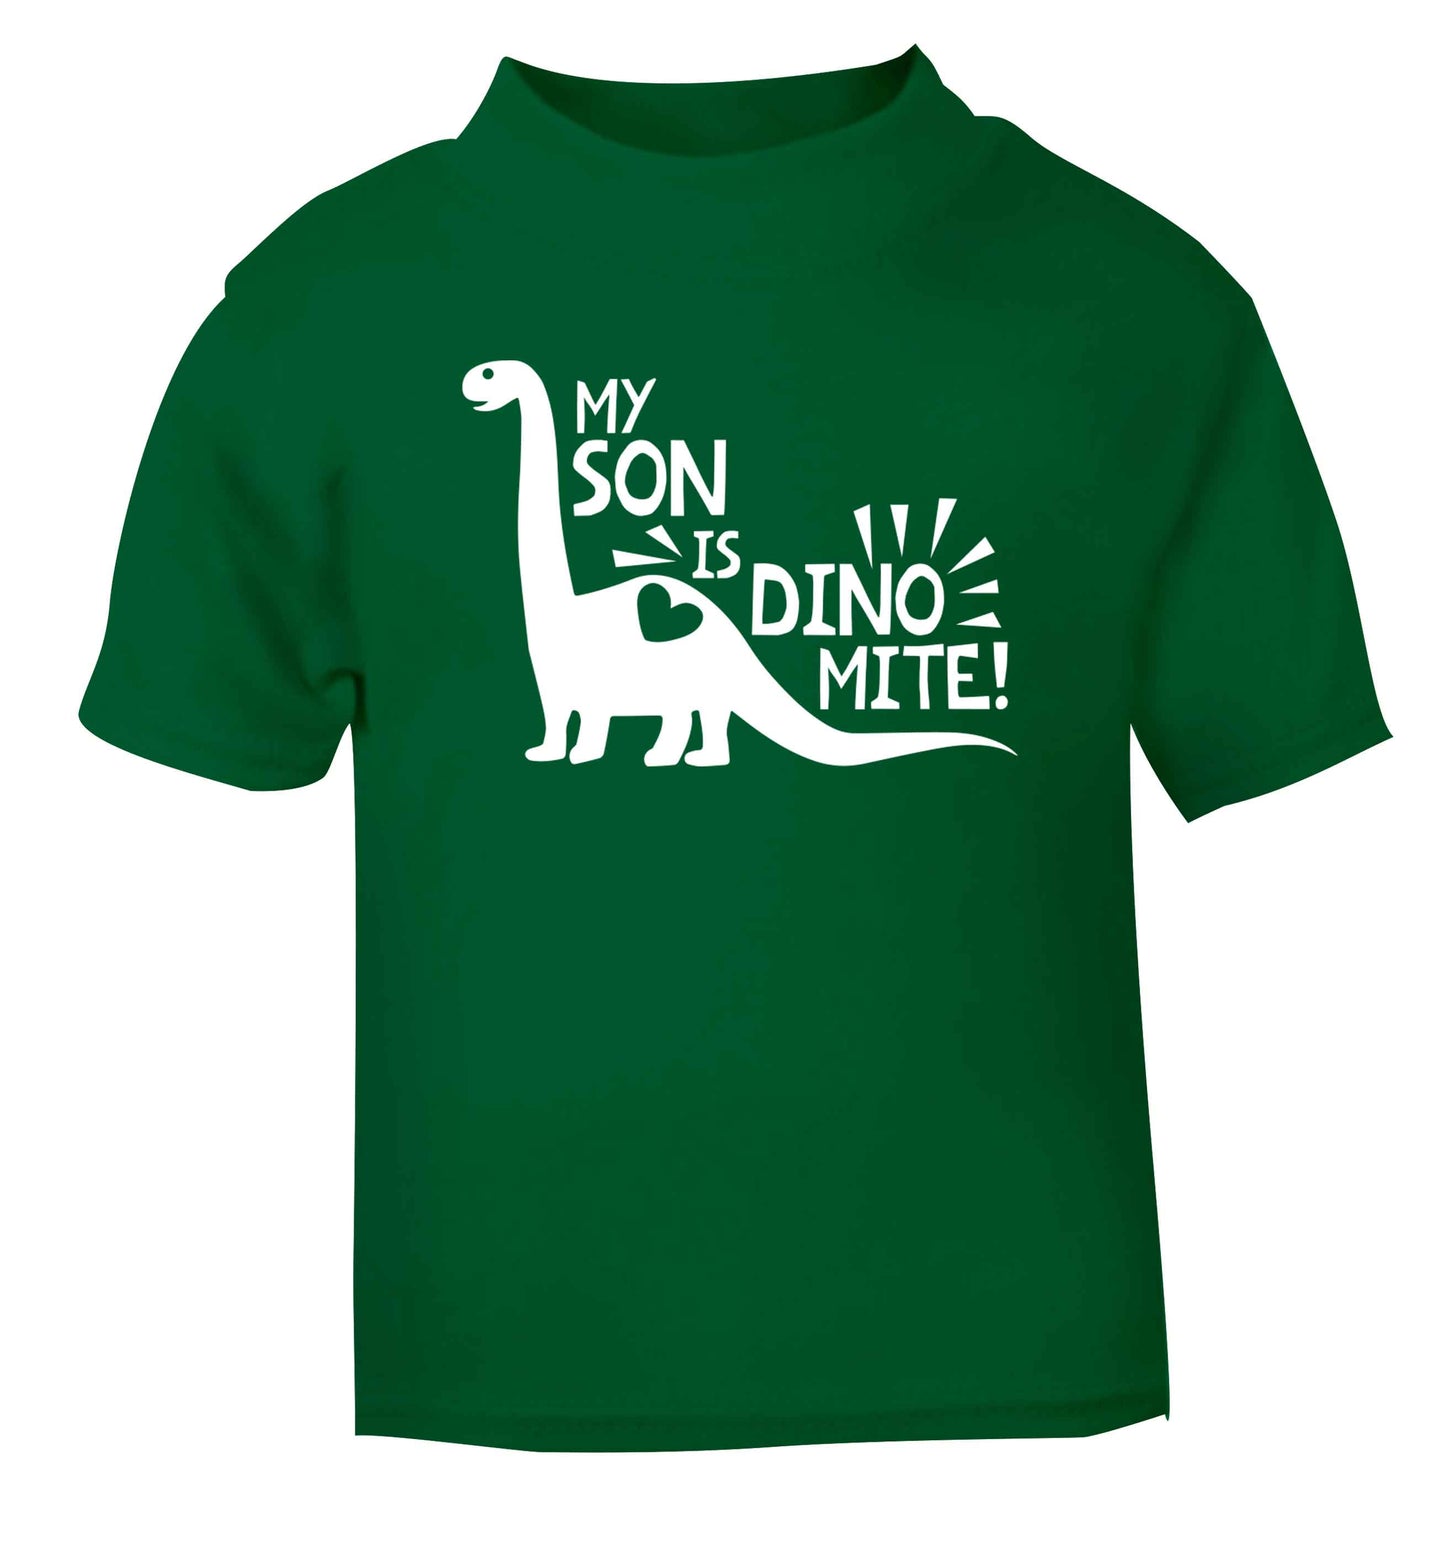 My son is dinomite! green Baby Toddler Tshirt 2 Years